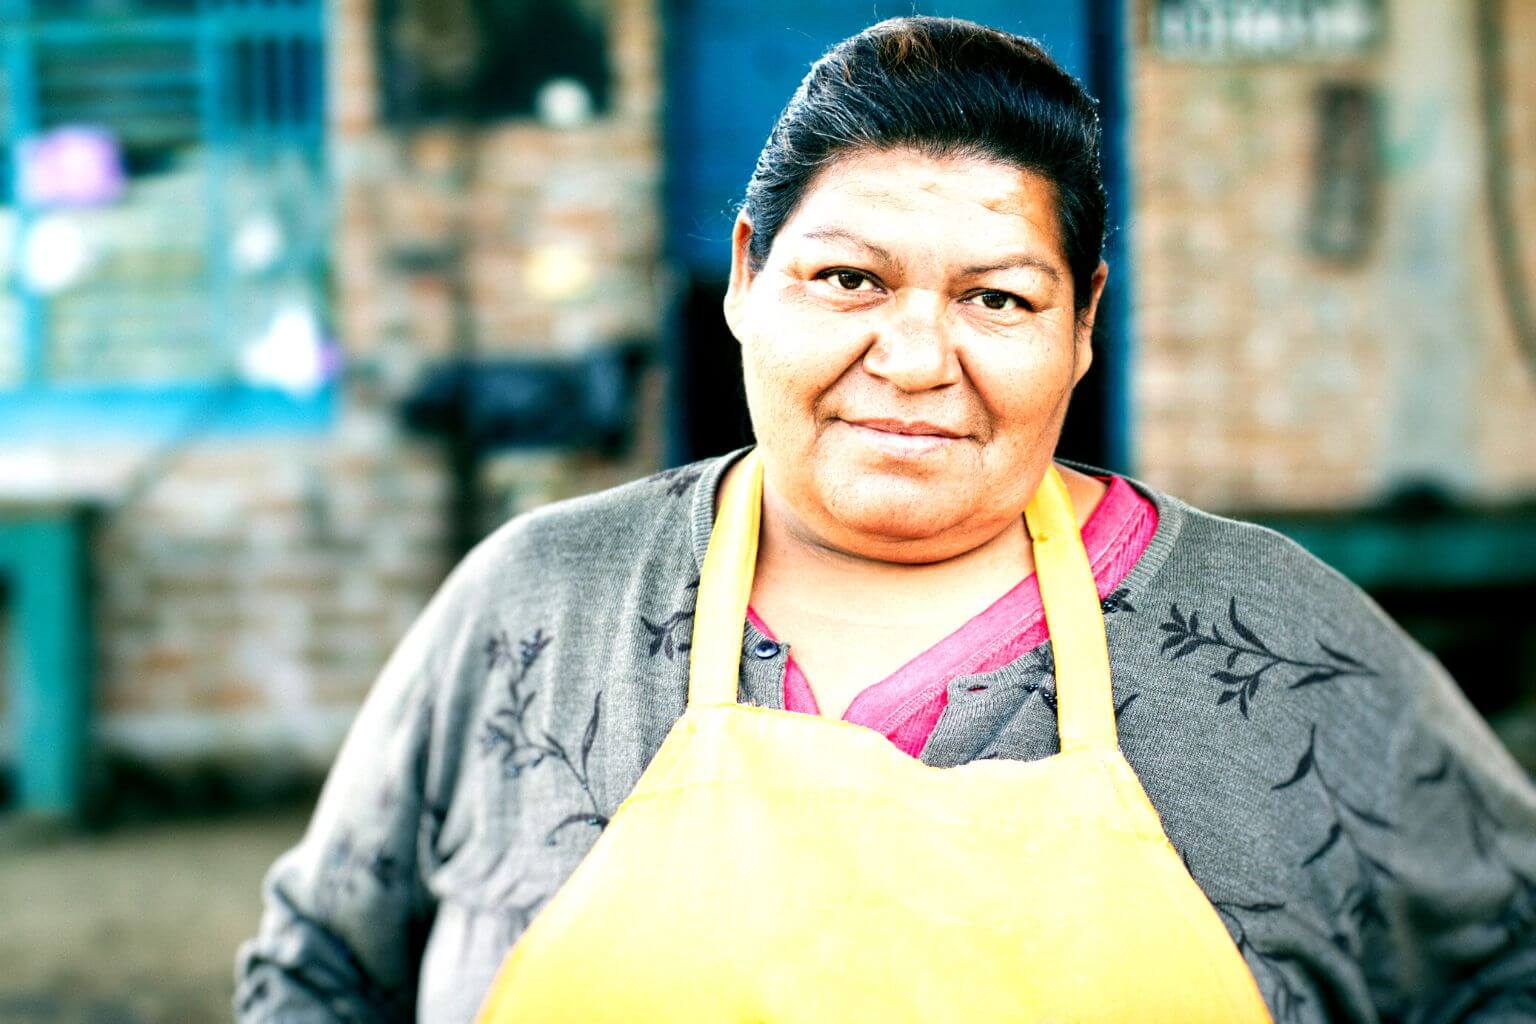 Mexican female worker